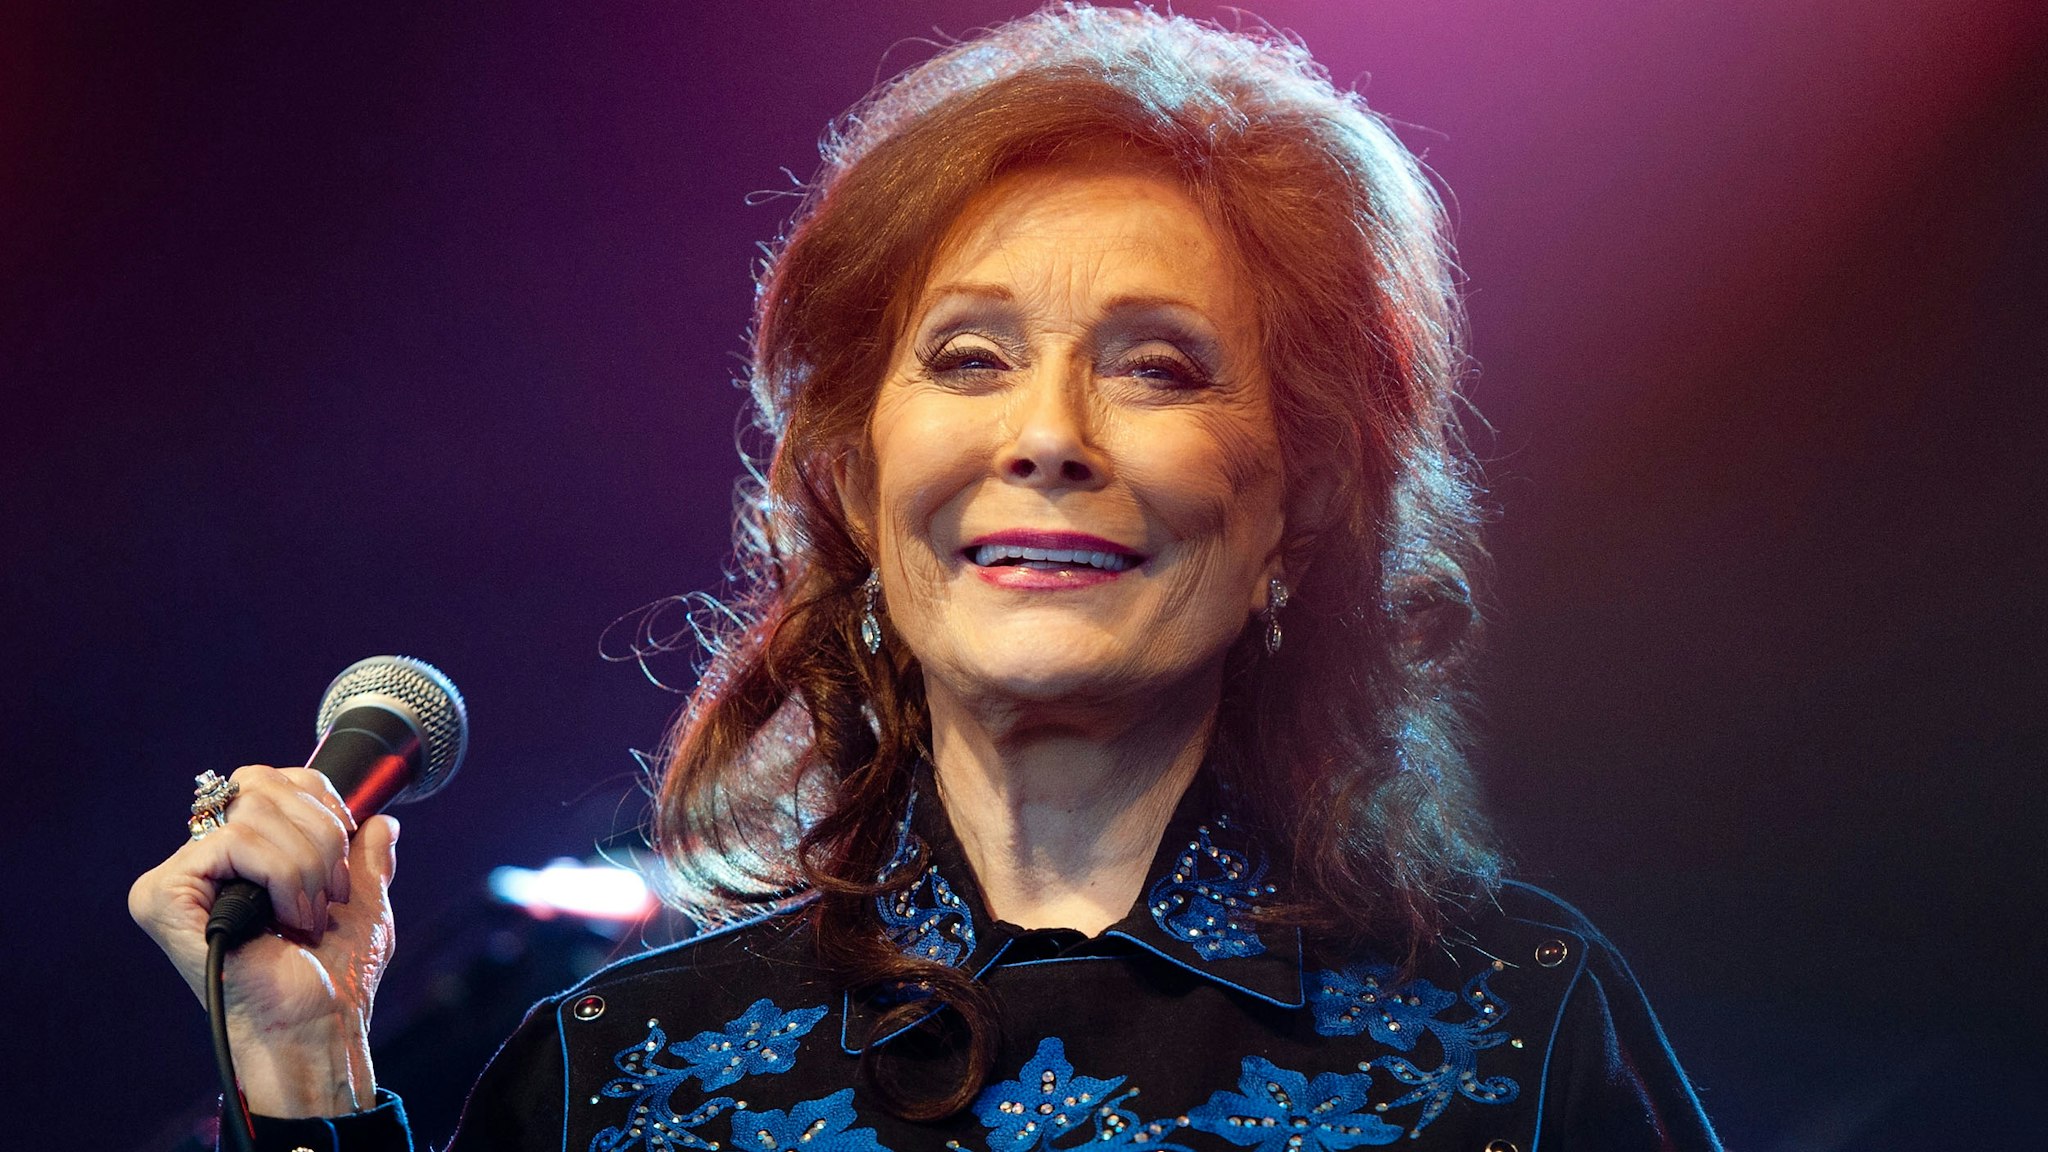 Loretta Lynn performs during the 2011 Bonnaroo Music and Arts Festival on June 11, 2011 in Manchester, Tennessee.